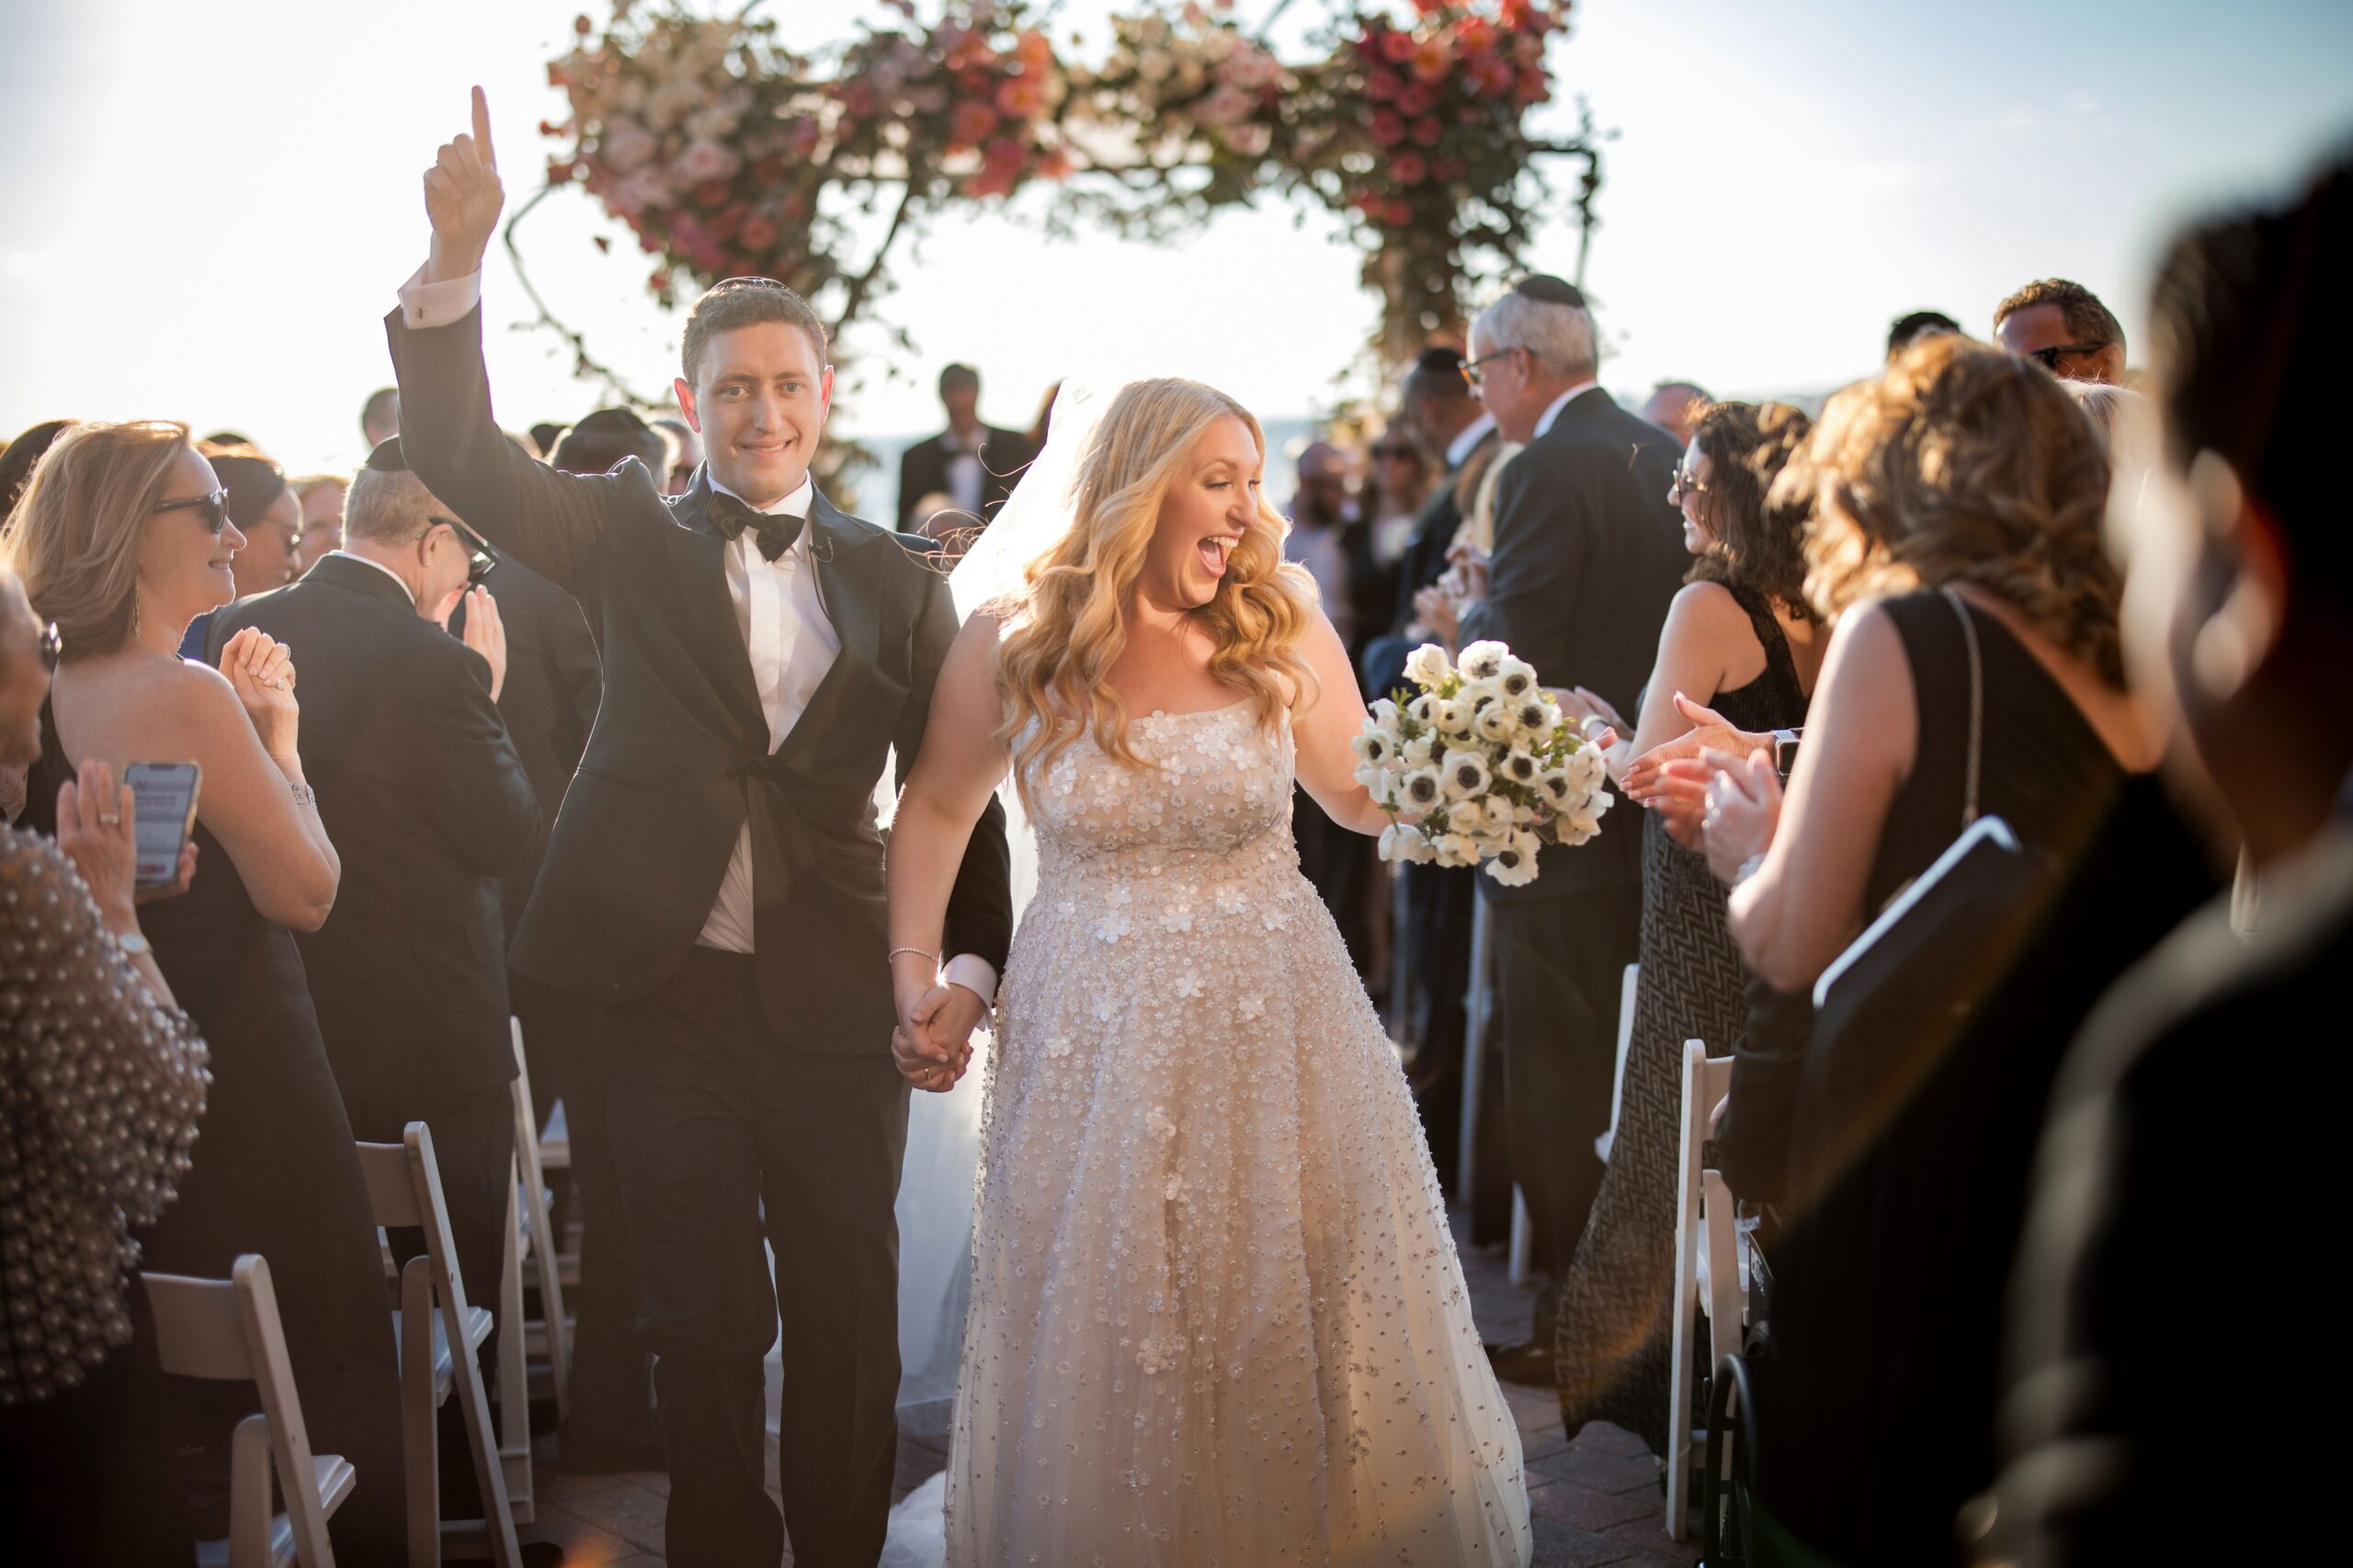 A bride and groom walk down the aisle after their Liberty Warehouse wedding, holding hands and smiling, surrounded by applauding guests. A floral archway is visible in the background.